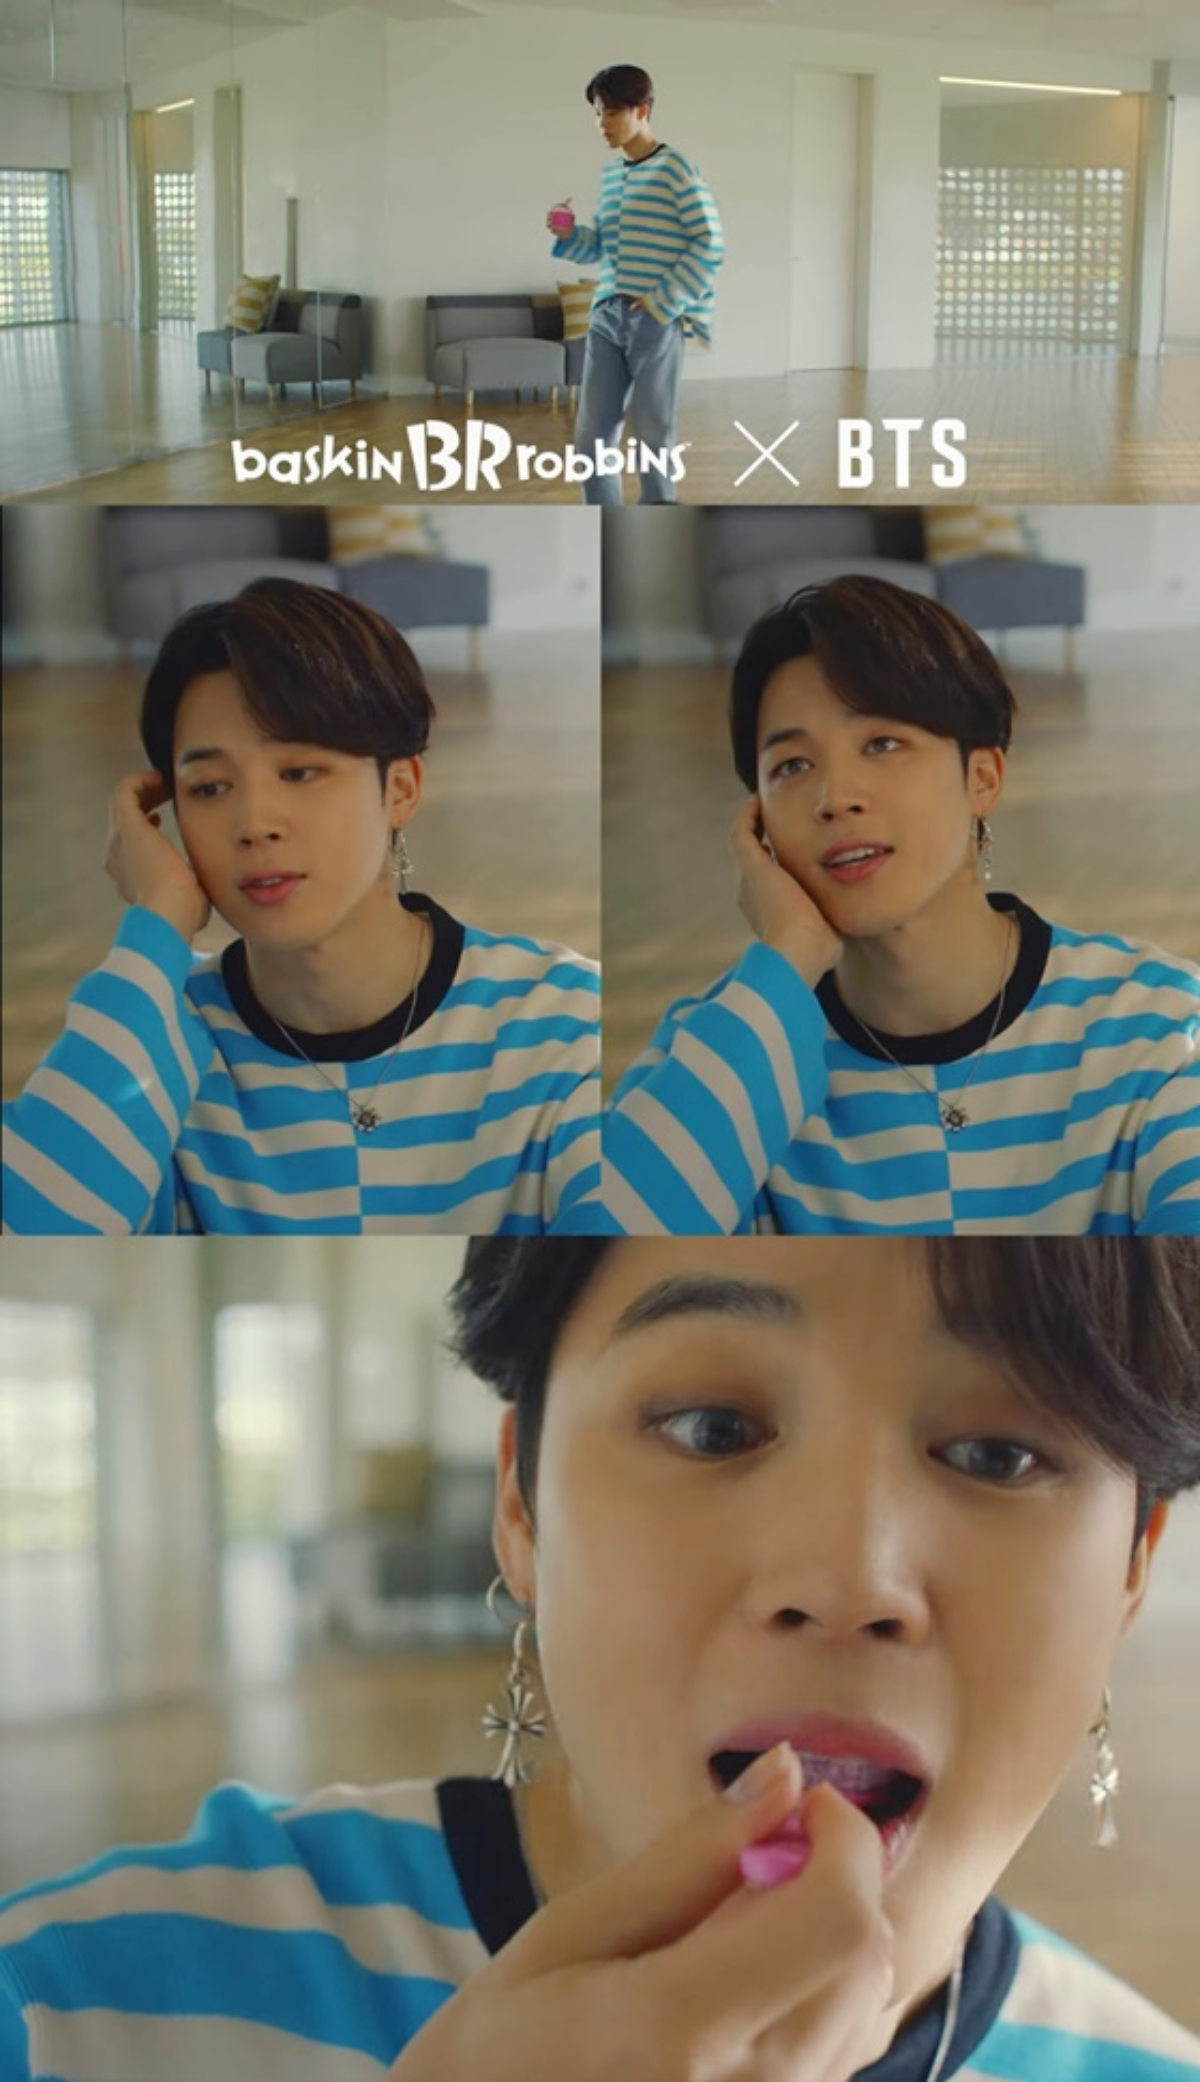 BTS Jimin, Lovely Fresh Visual in the Ice Cream Commercial